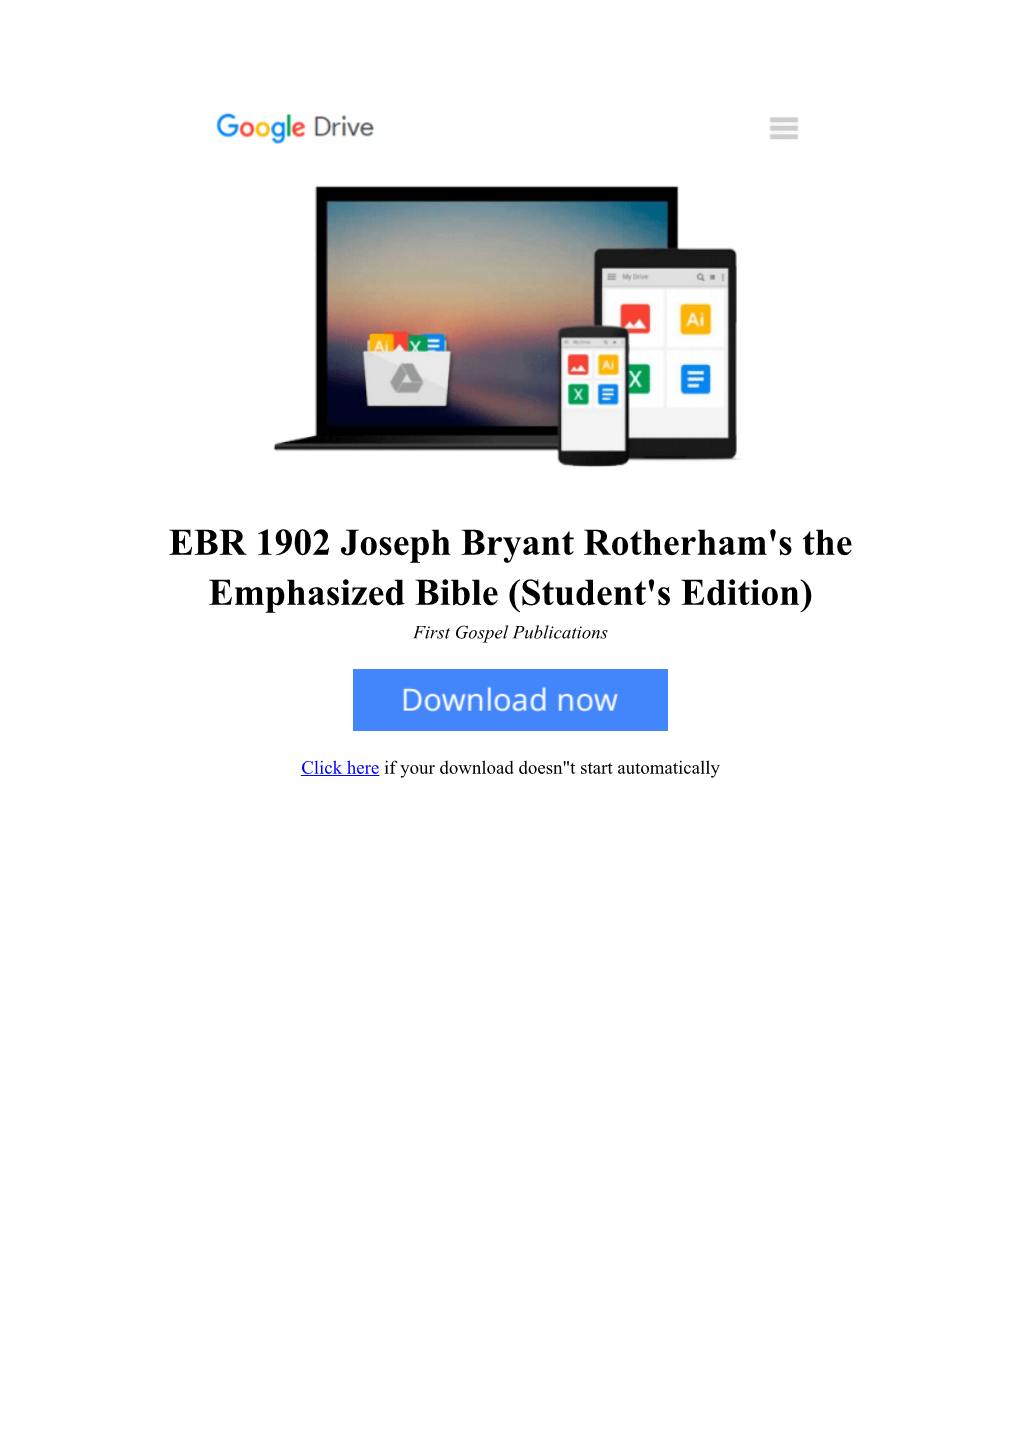 [6CZS]⋙ EBR 1902 Joseph Bryant Rotherham's the Emphasized Bible (Student's Edition) by First Gospel Publications #KY5X